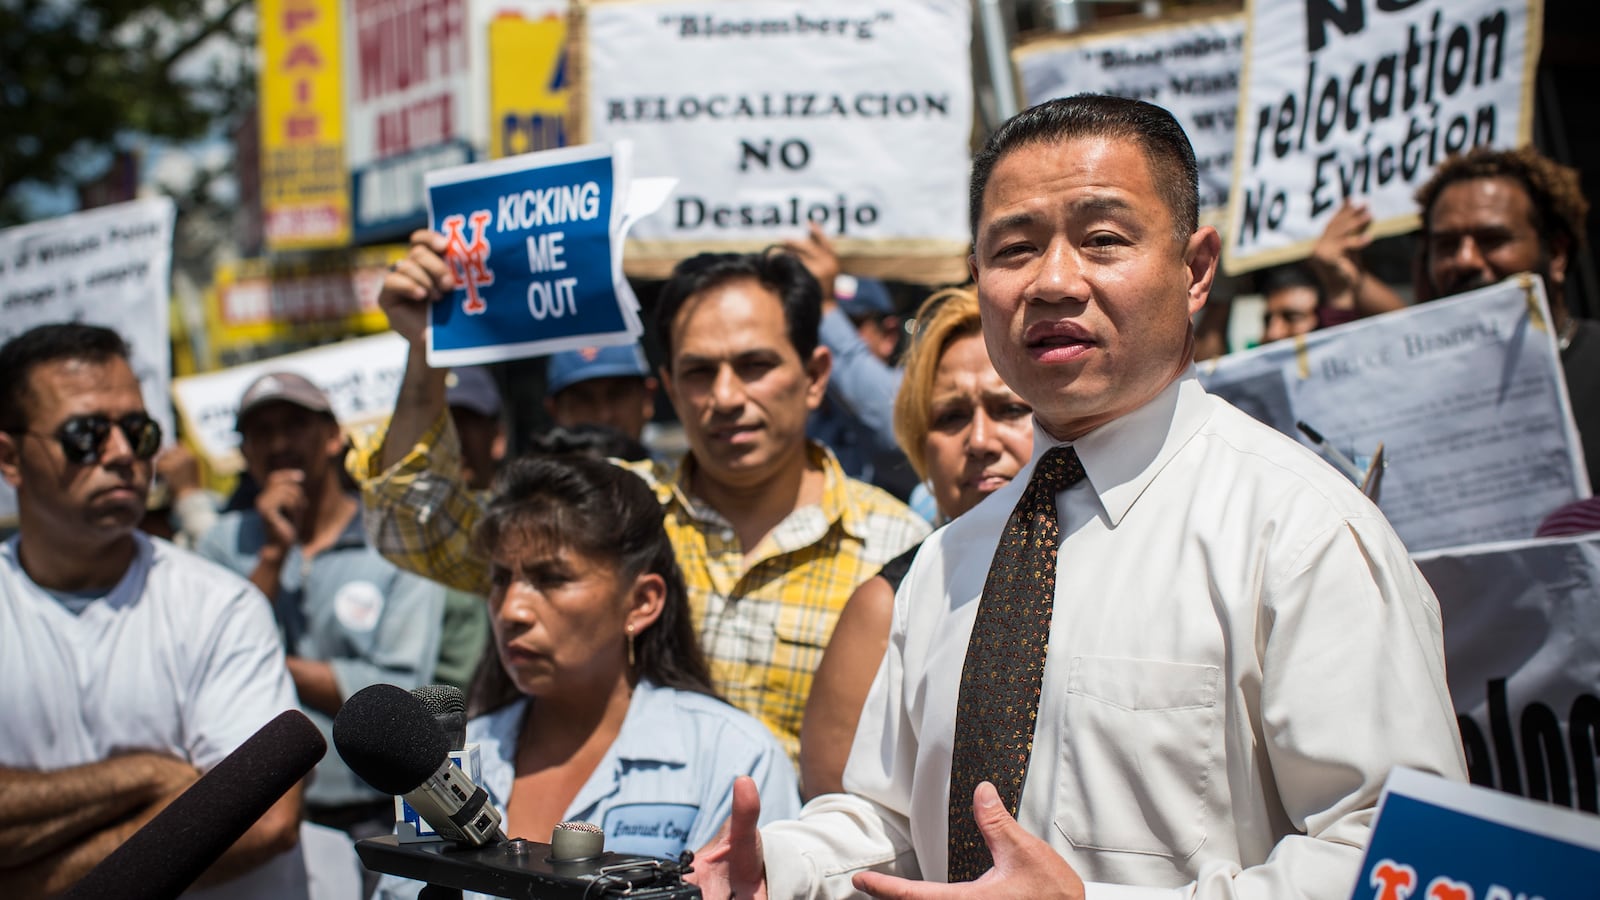 John Liu, former mayoral candidate, speaks at a protest in 2013. (Photo by Andrew Burton | Getty Images)